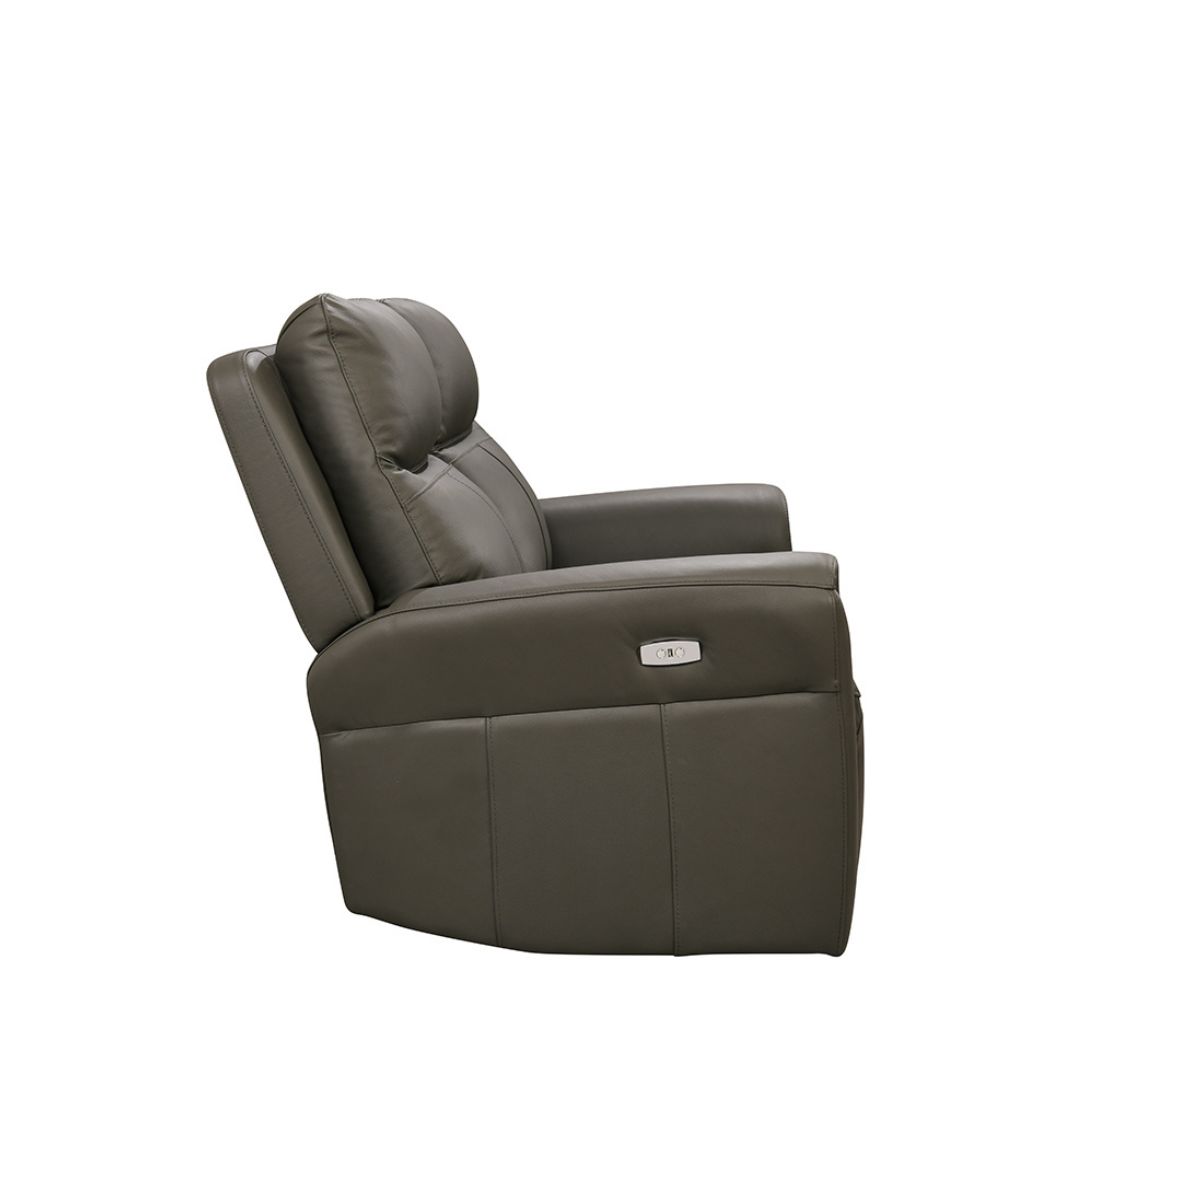 Rosslare Leather 3 Seater Electric Recliner Grey - 2